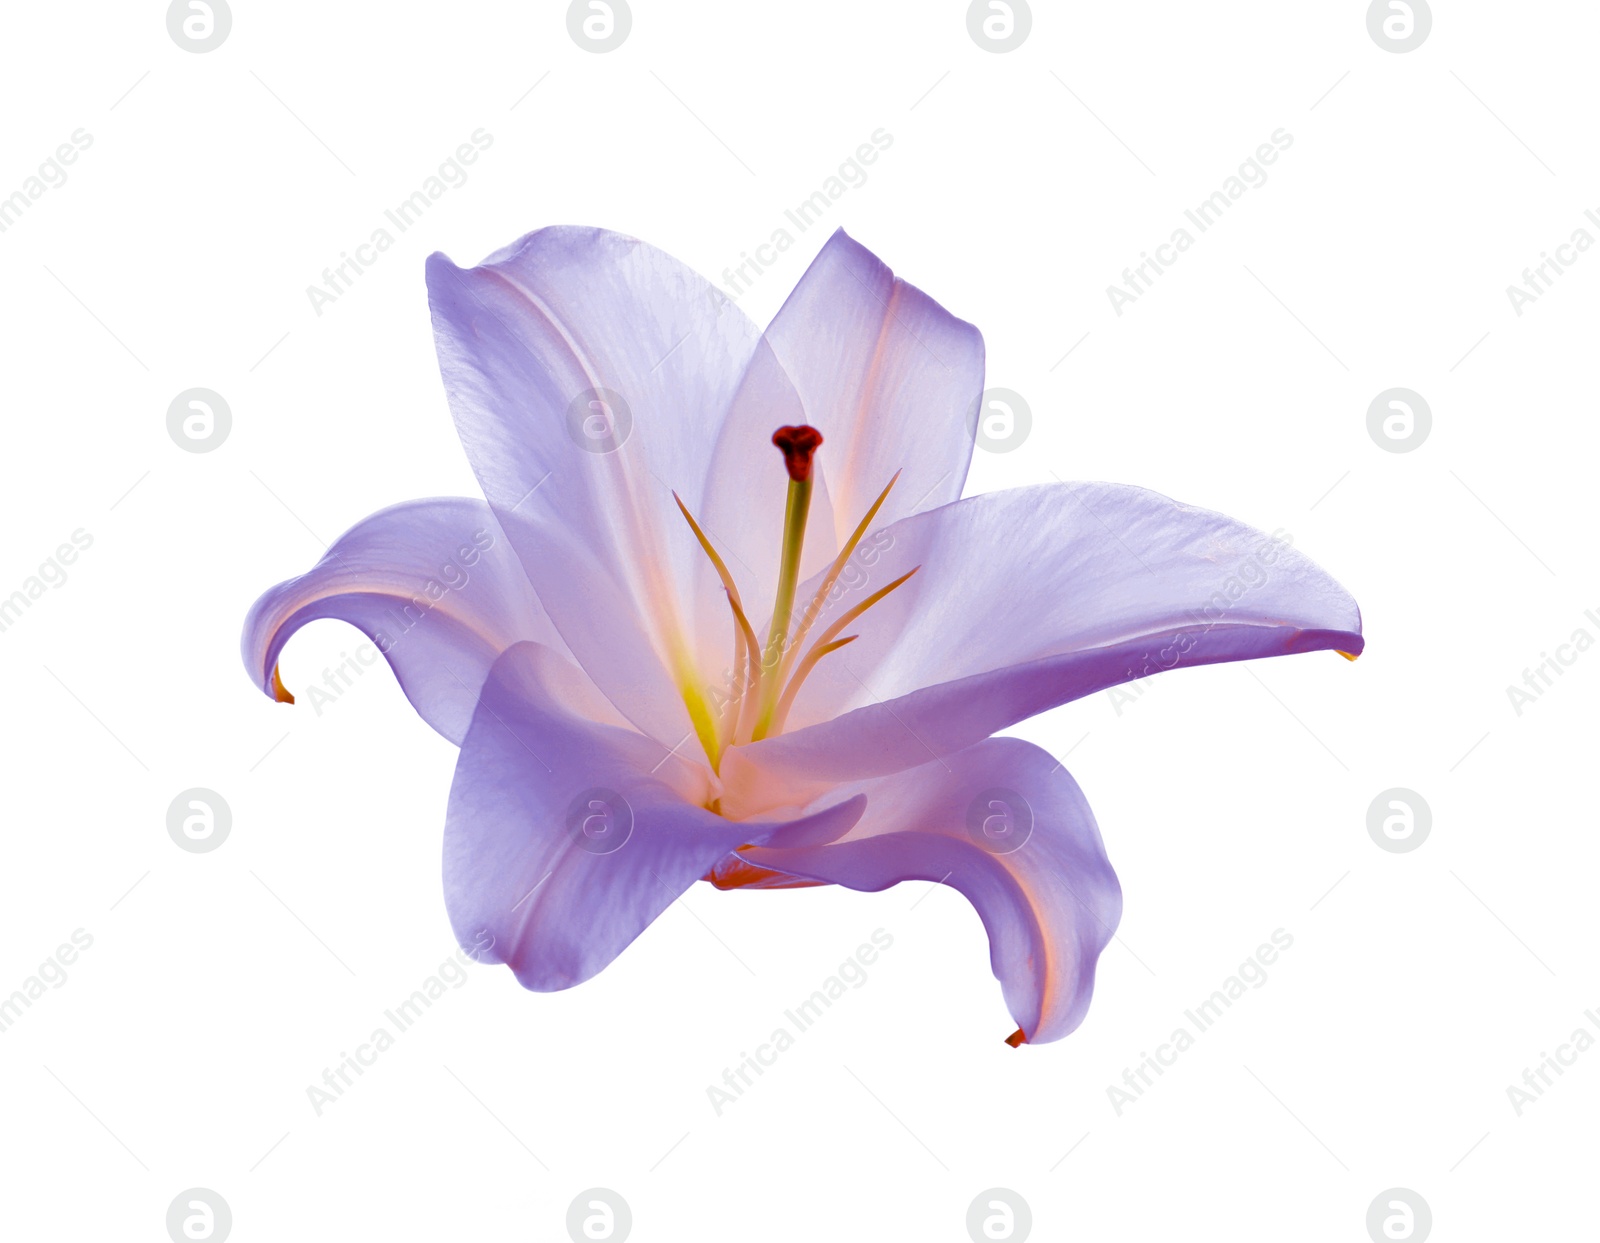 Image of Amazing colorful lily flower isolated on white